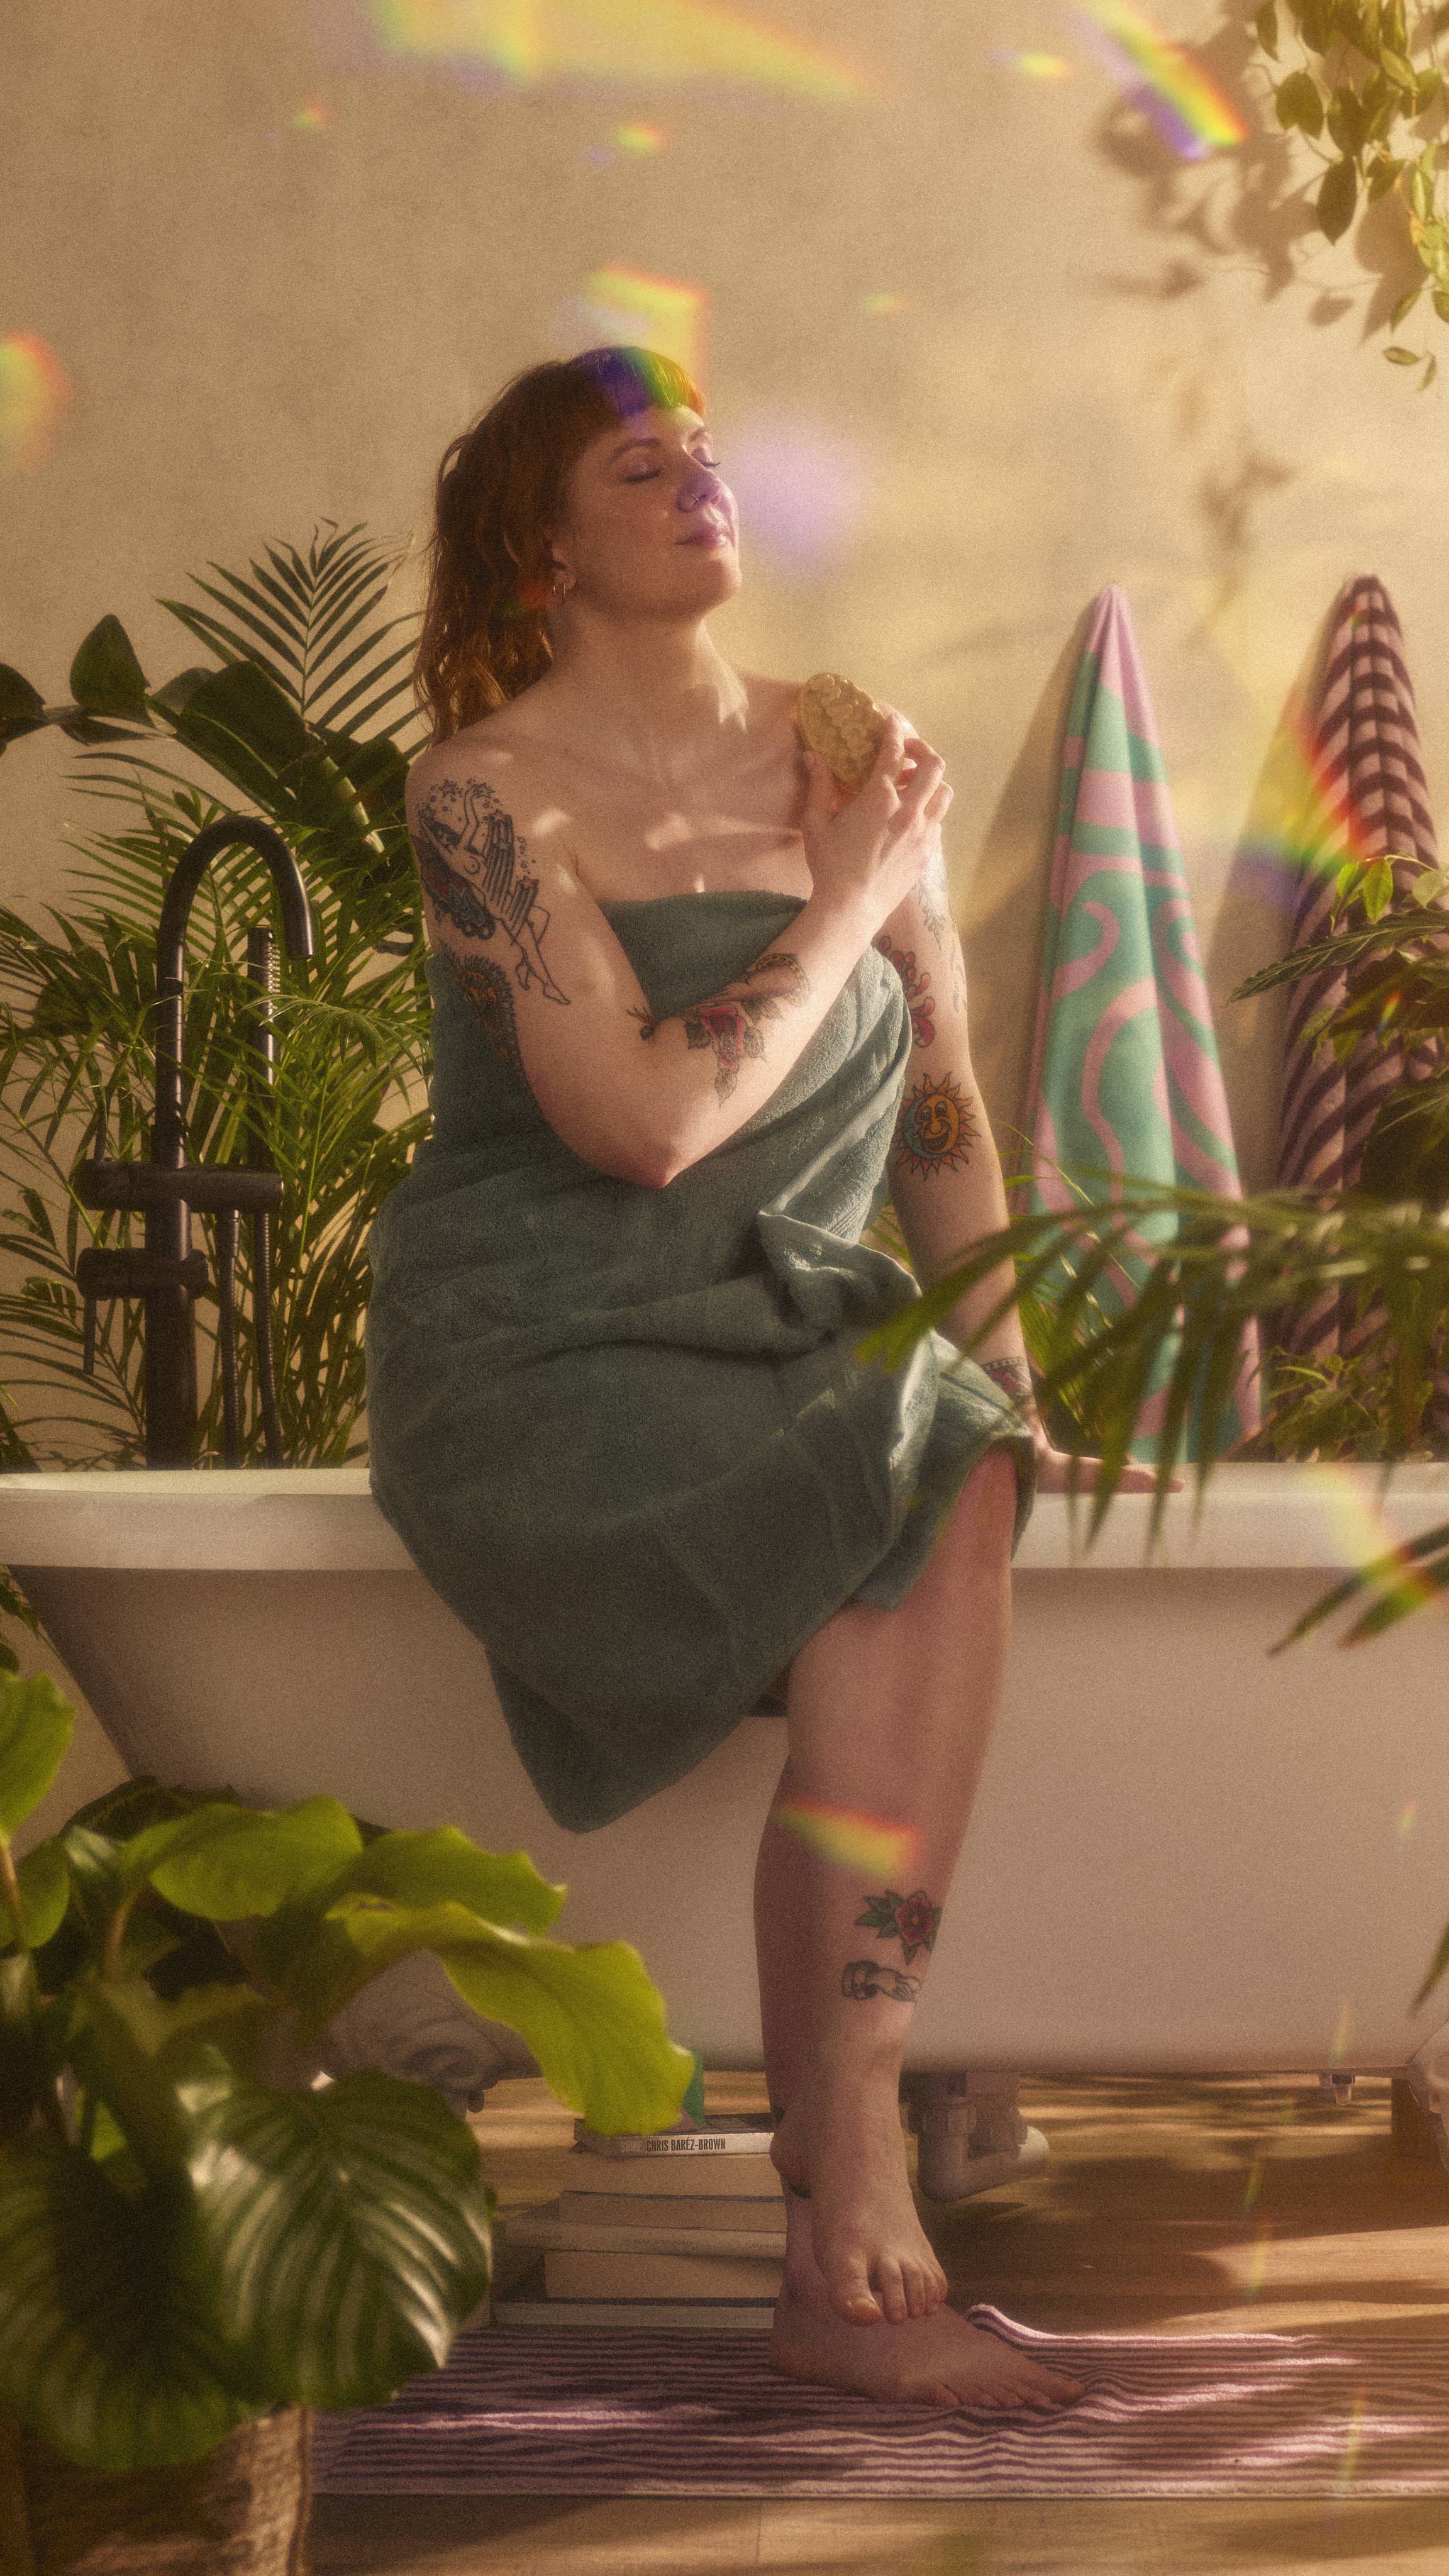 The model is wrapped in a sage green towel while sitting on the edge of a roll-top bathtub using the Magik massage bar over their chest. The image has flecks of rainbow reflections on a warm, sepia tone.